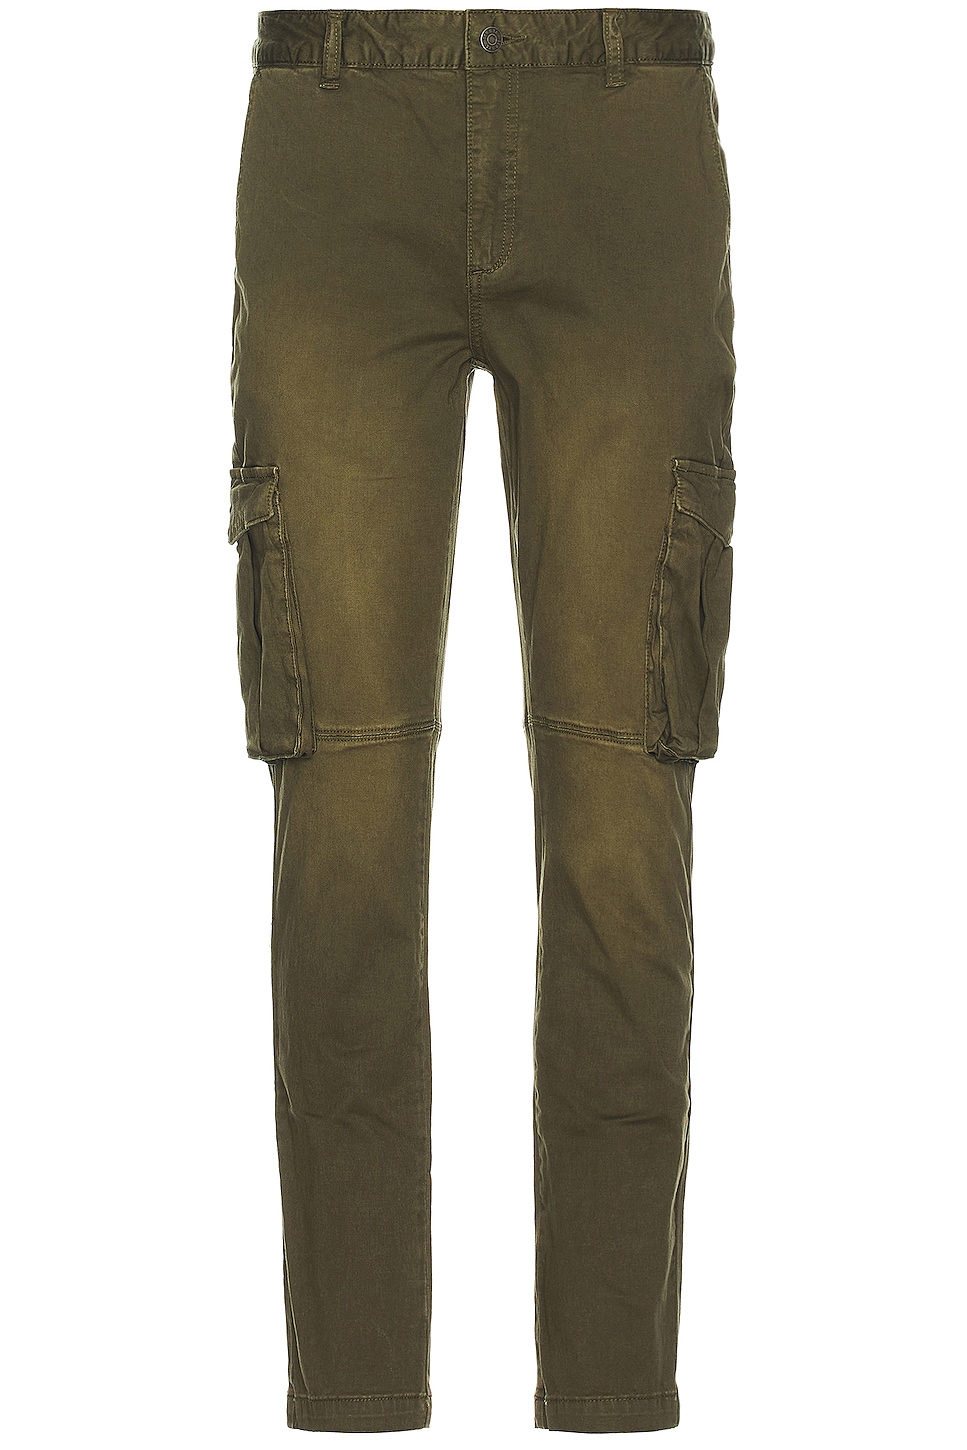 Image 1 of SER.O.YA Jacob Pant in Vintage Army Green